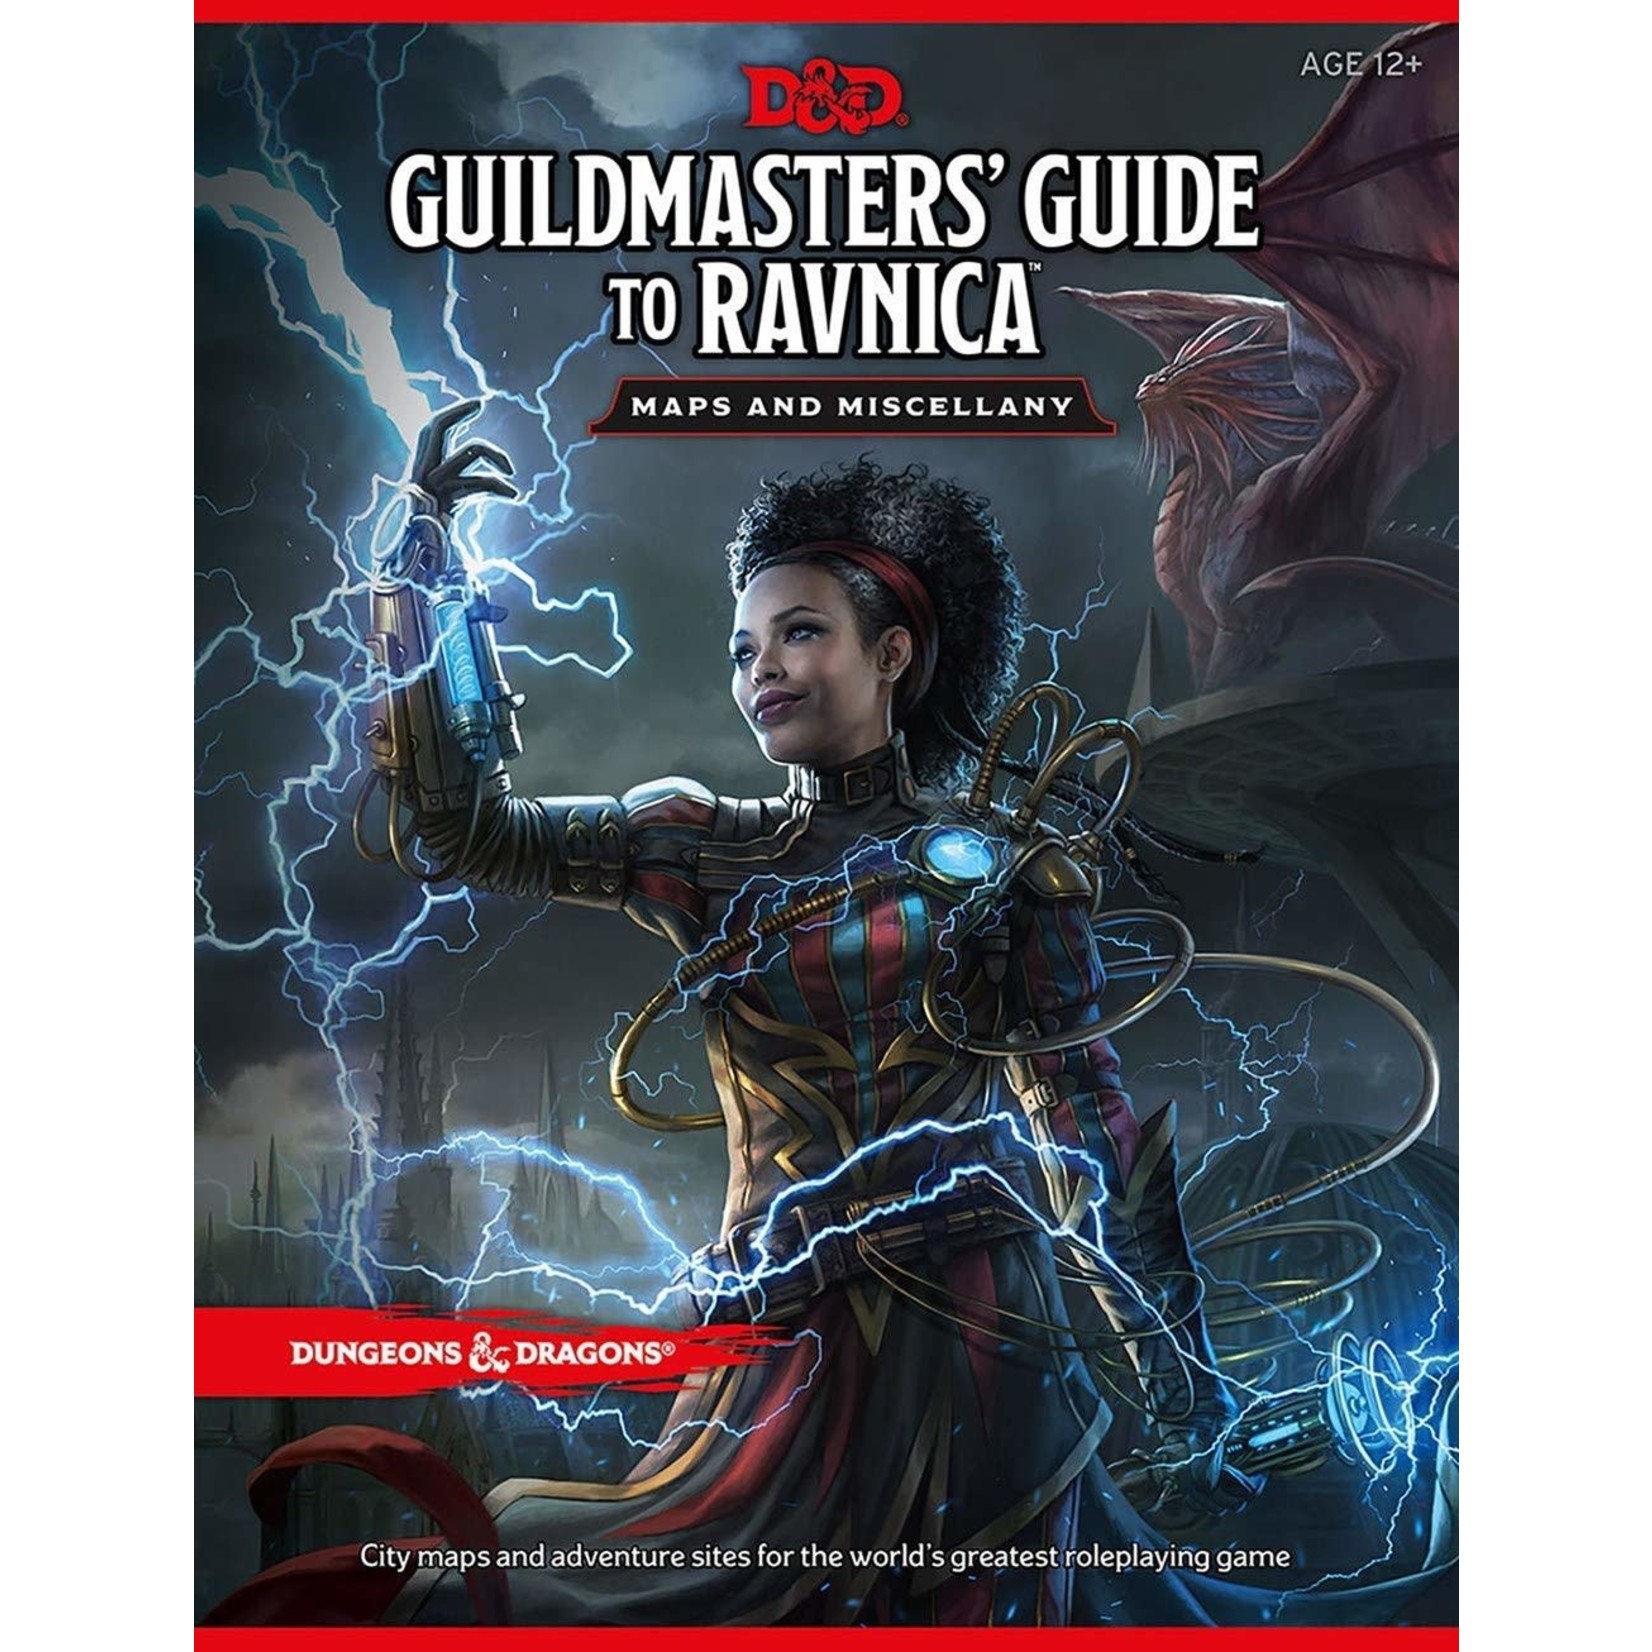 Wizards of the Coast D&D 5e Guildmaster’s Guide to Ravnica Maps and Miscellany